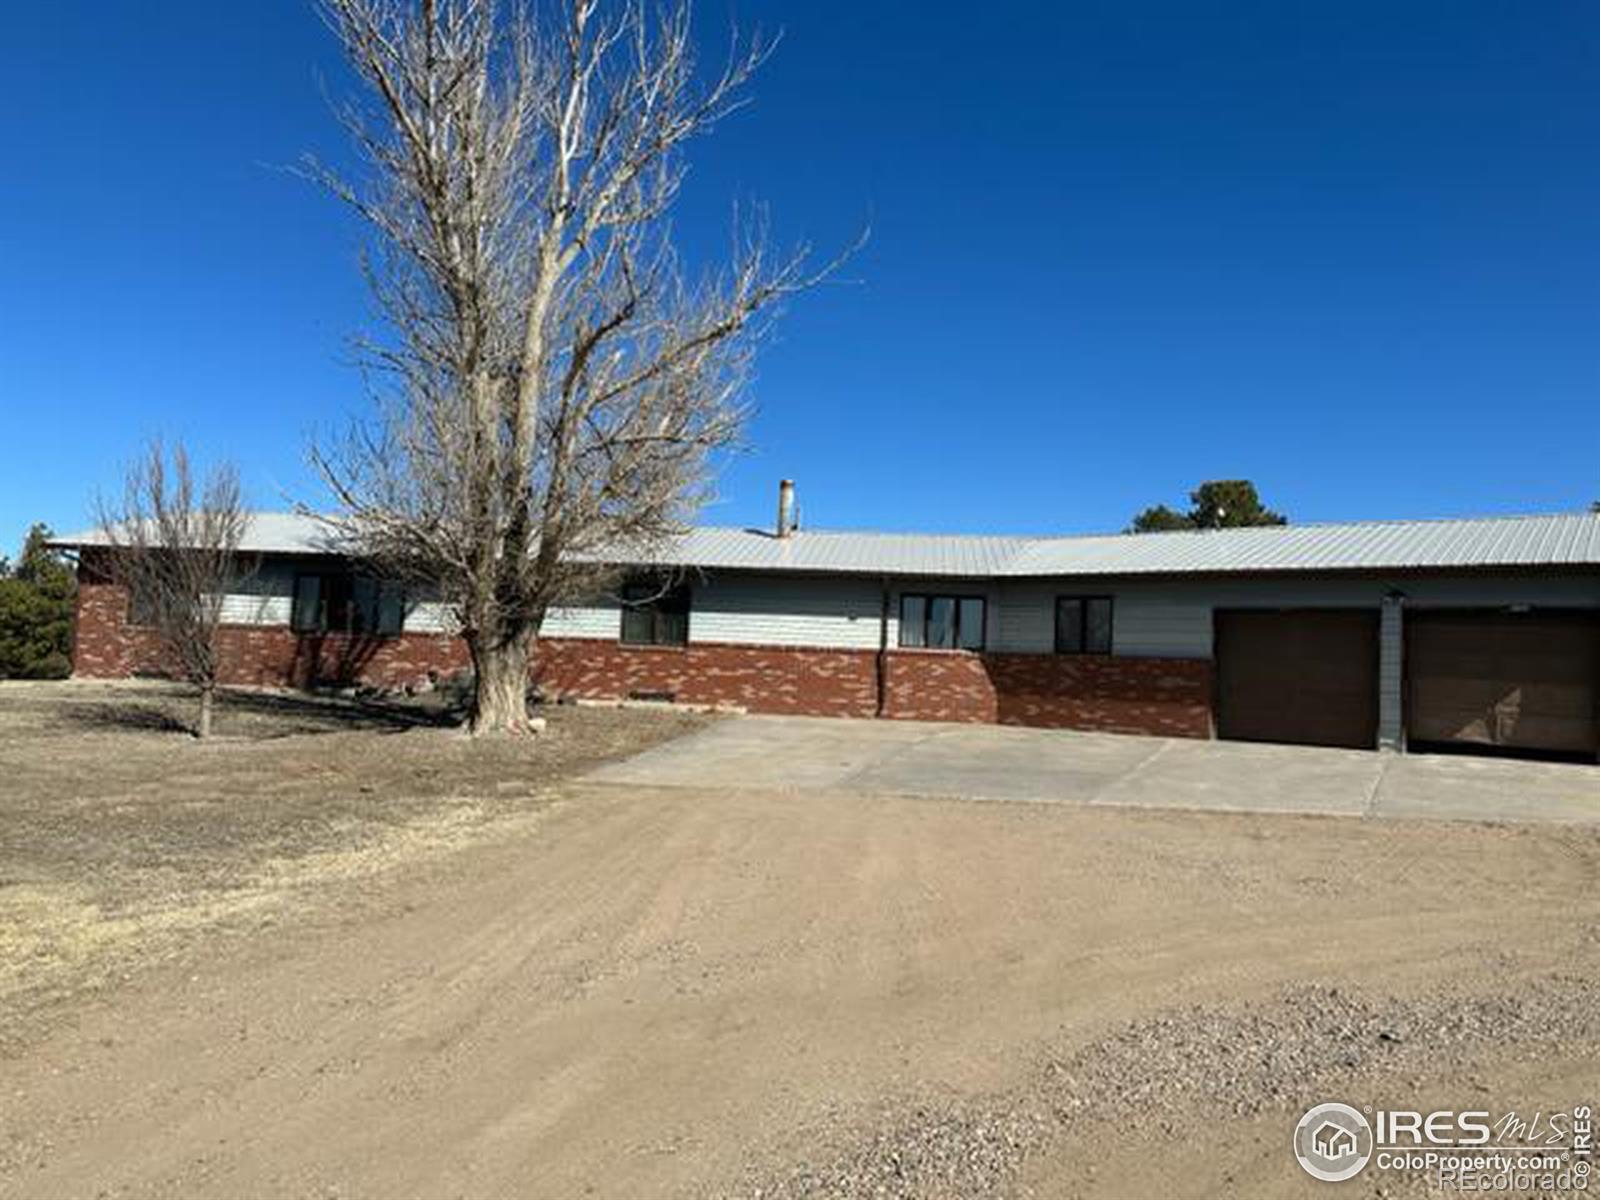 44729  county road q , Cheyenne sold home. Closed on 2023-09-21 for $290,000.